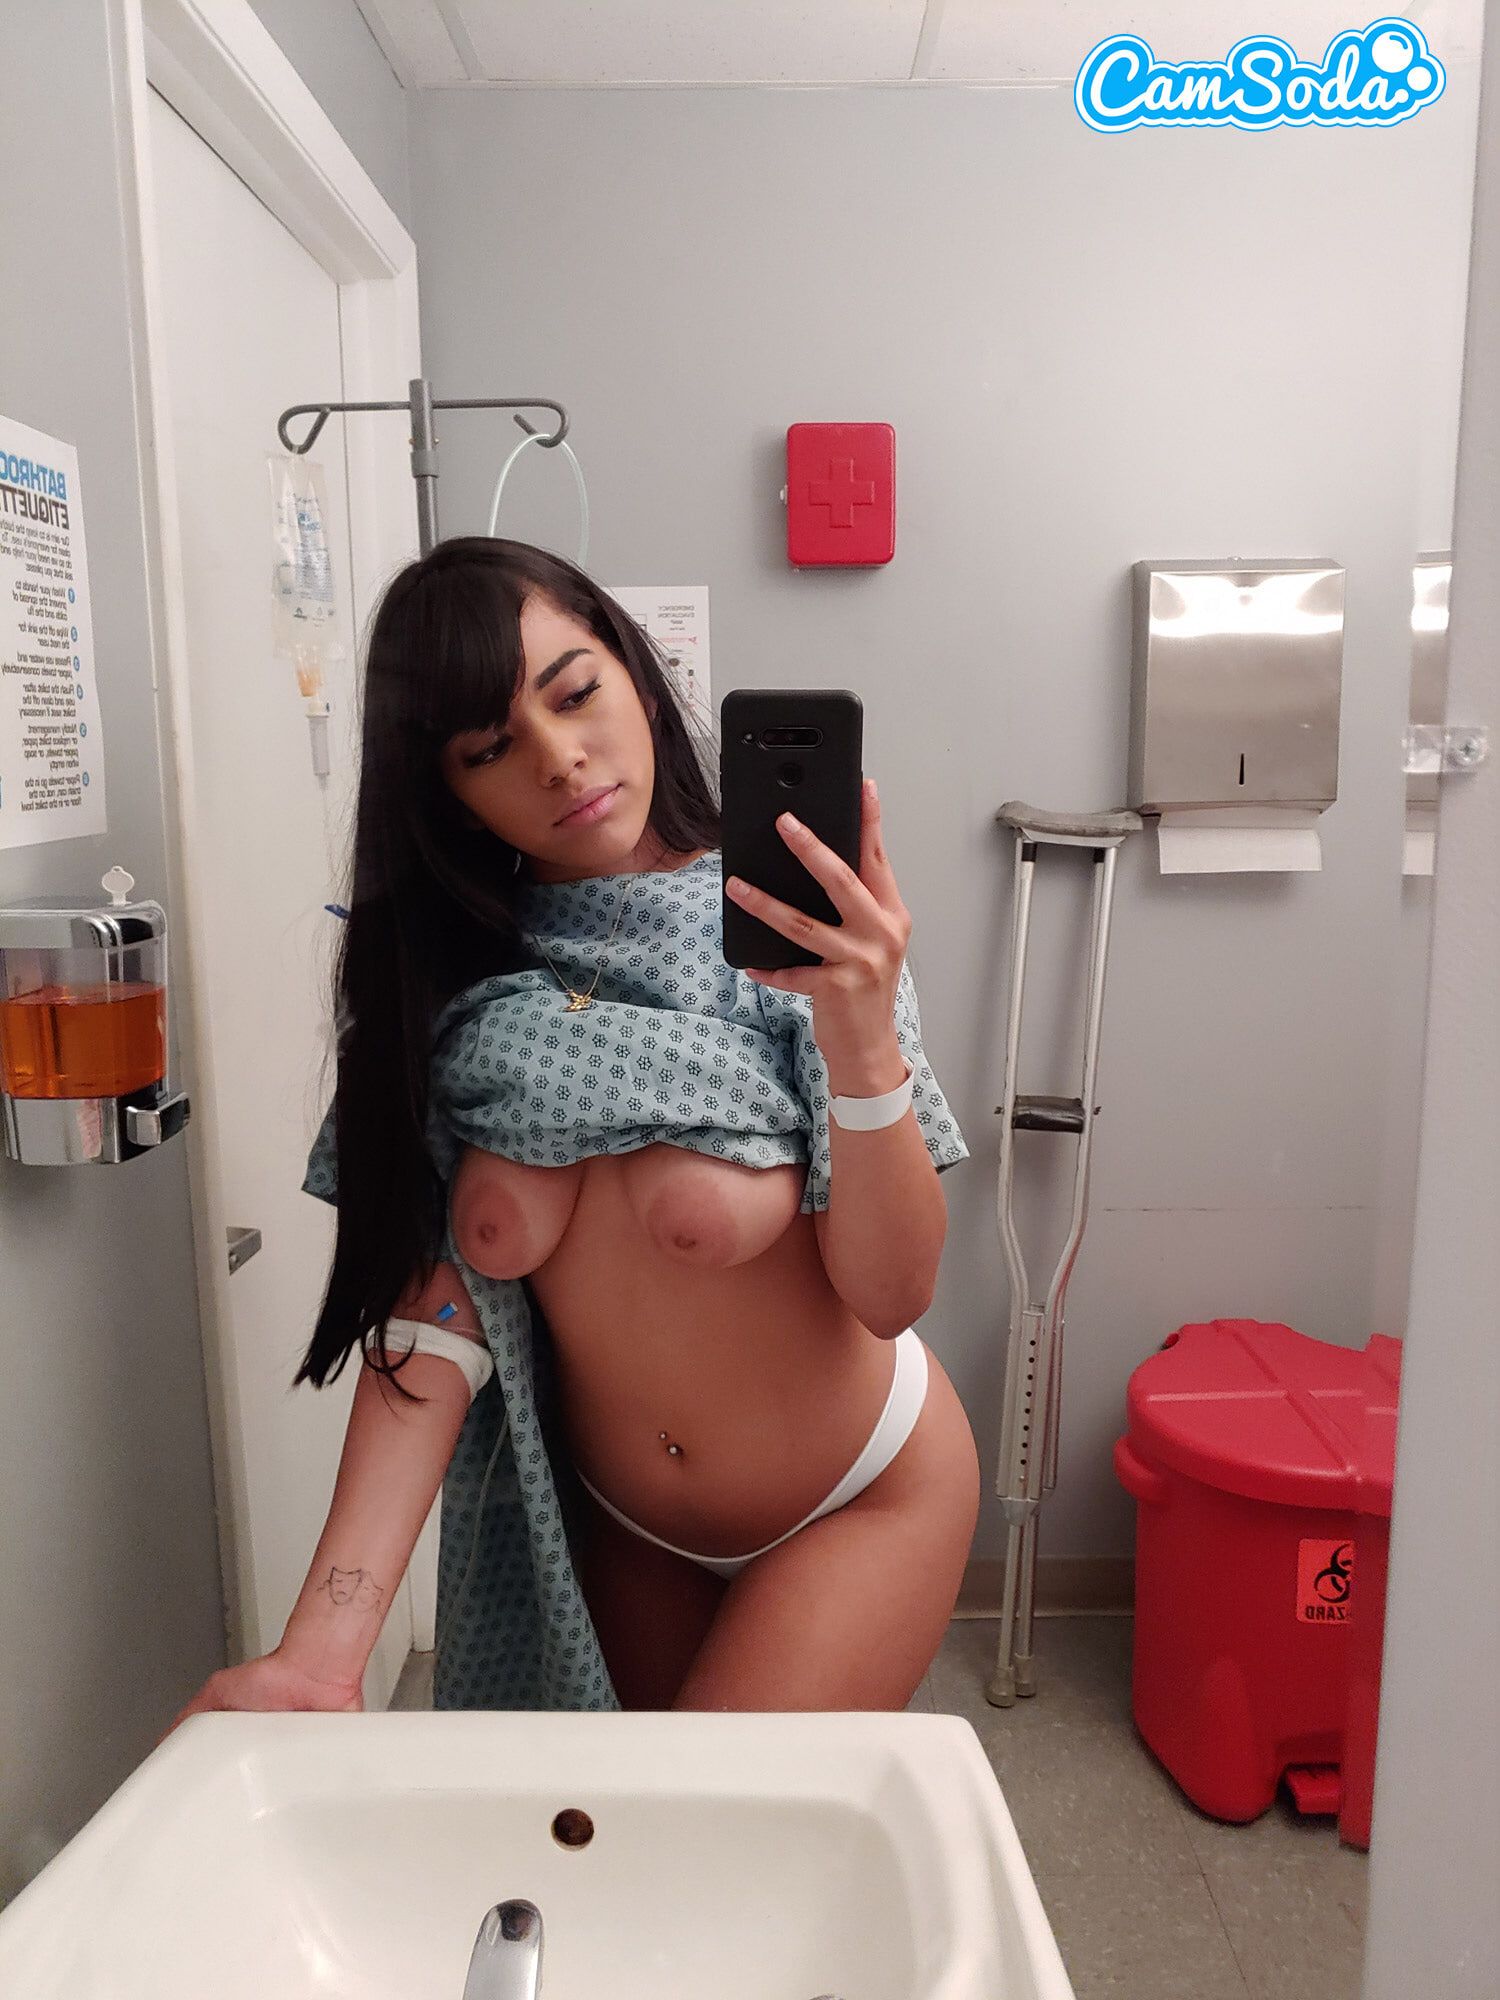 Big bootied latina teen gets horny in the ER #4